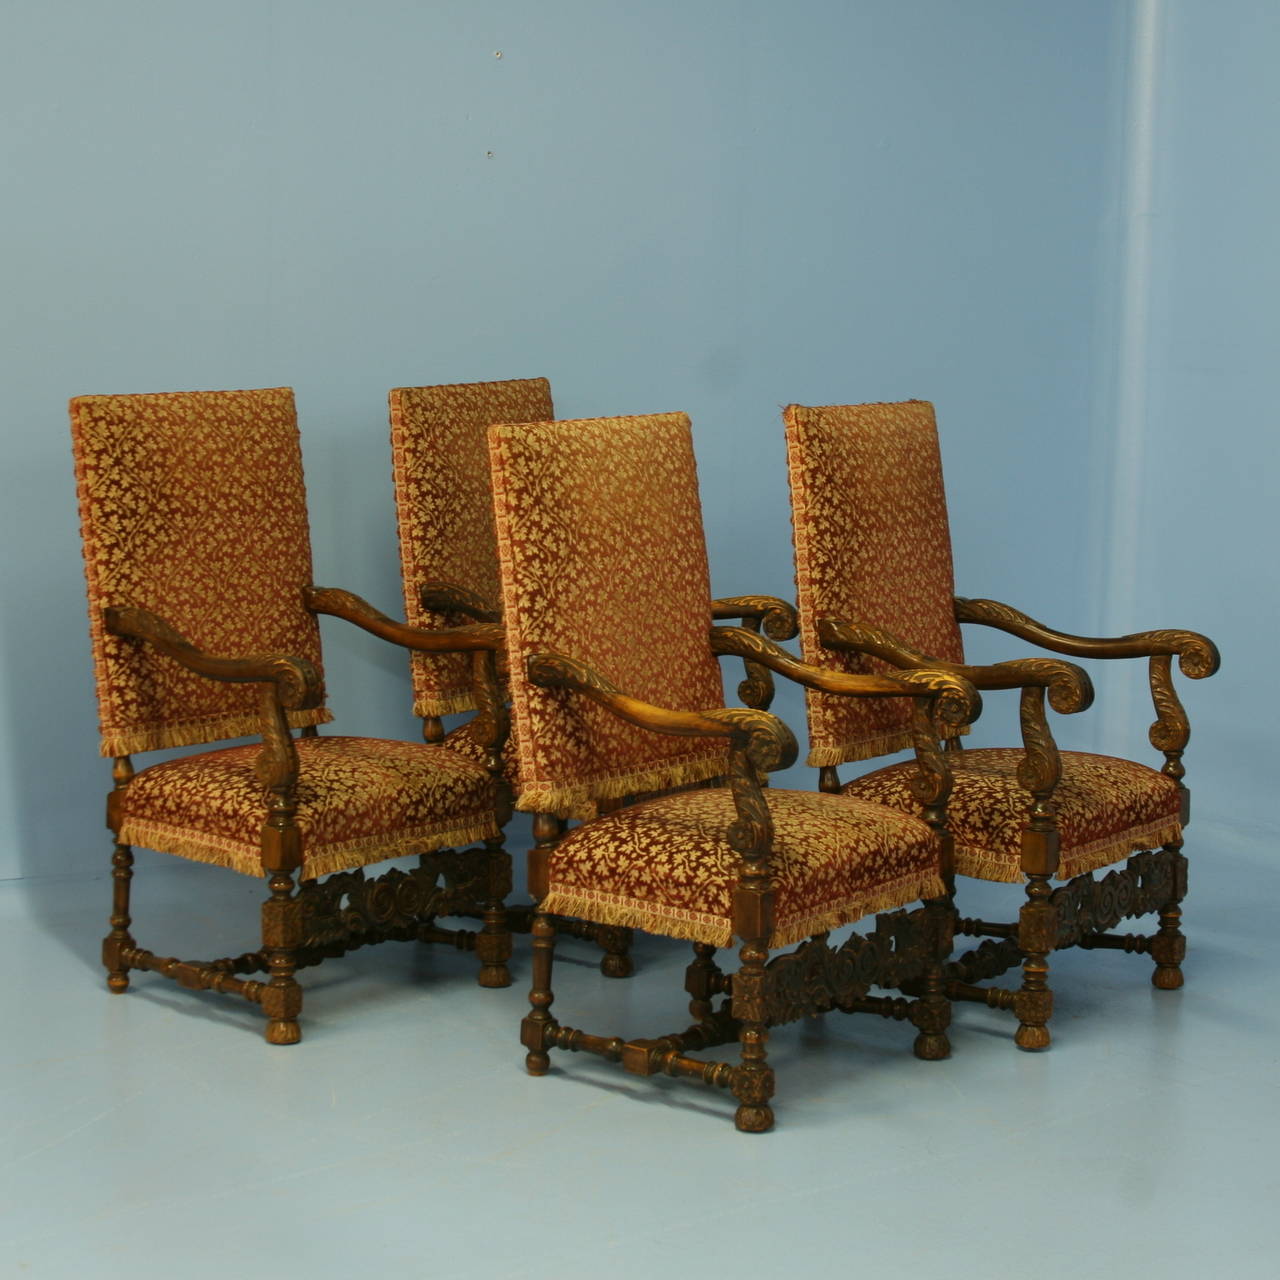 Set of 4 matching baroque oak carved arm chairs from Denmark. Please note the beautifully carved arms, feet and stretcher on this handsome set. These are typically found in pairs, unusual to find a large matching set of 4. The upholstery is old, but